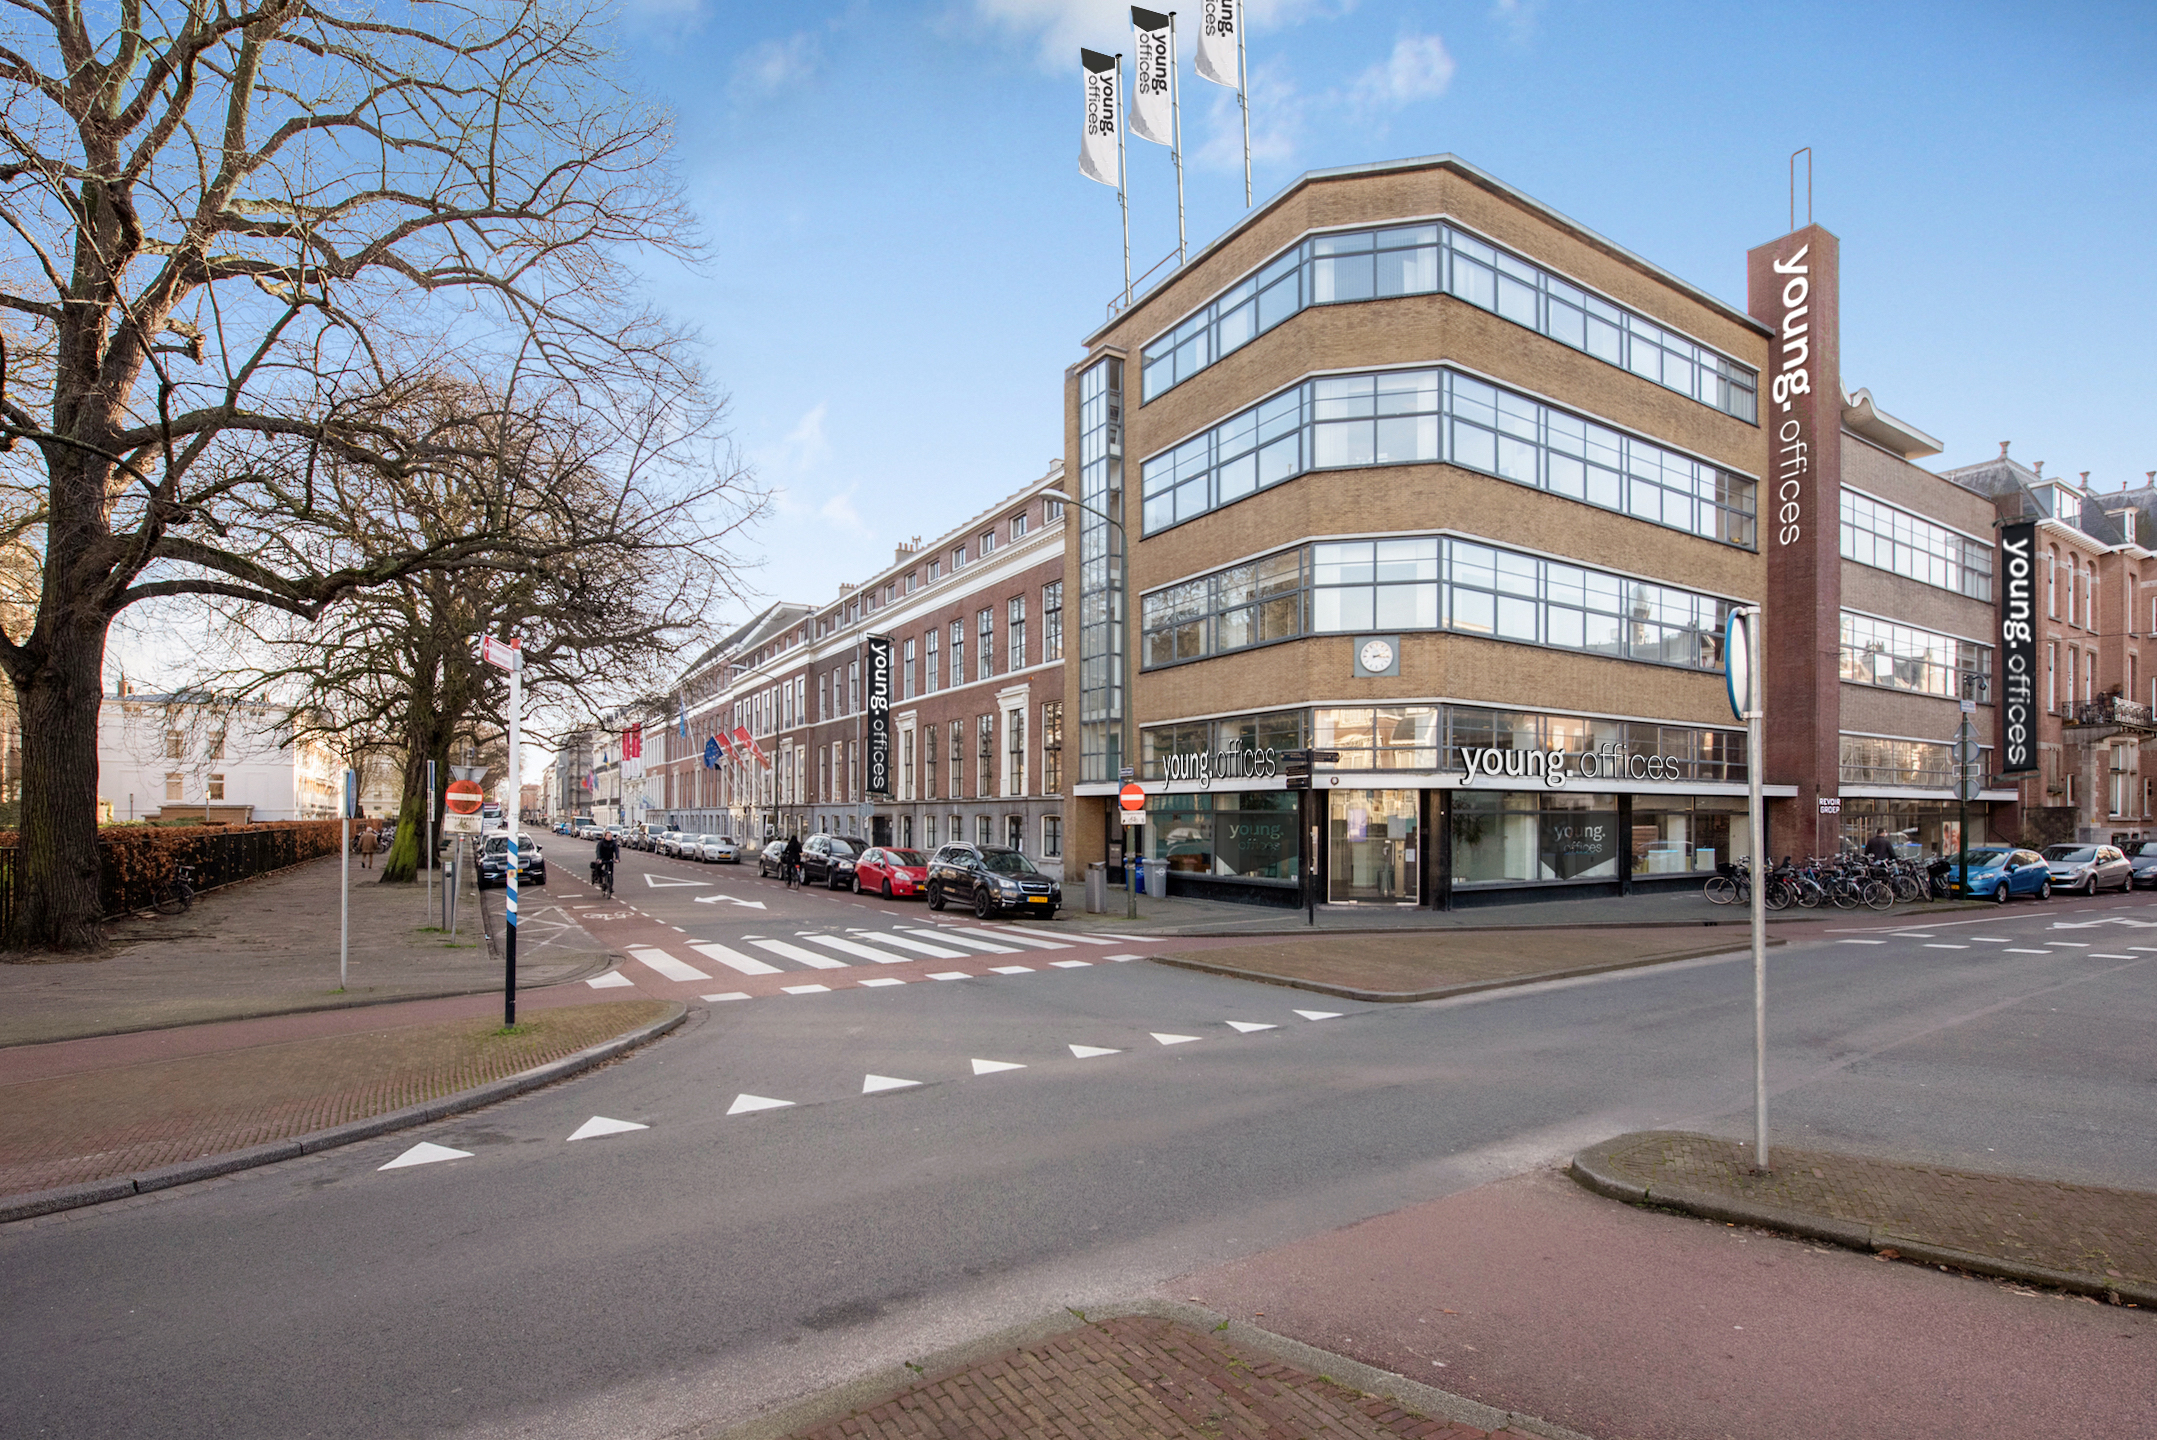 corner office buidling in The Hague